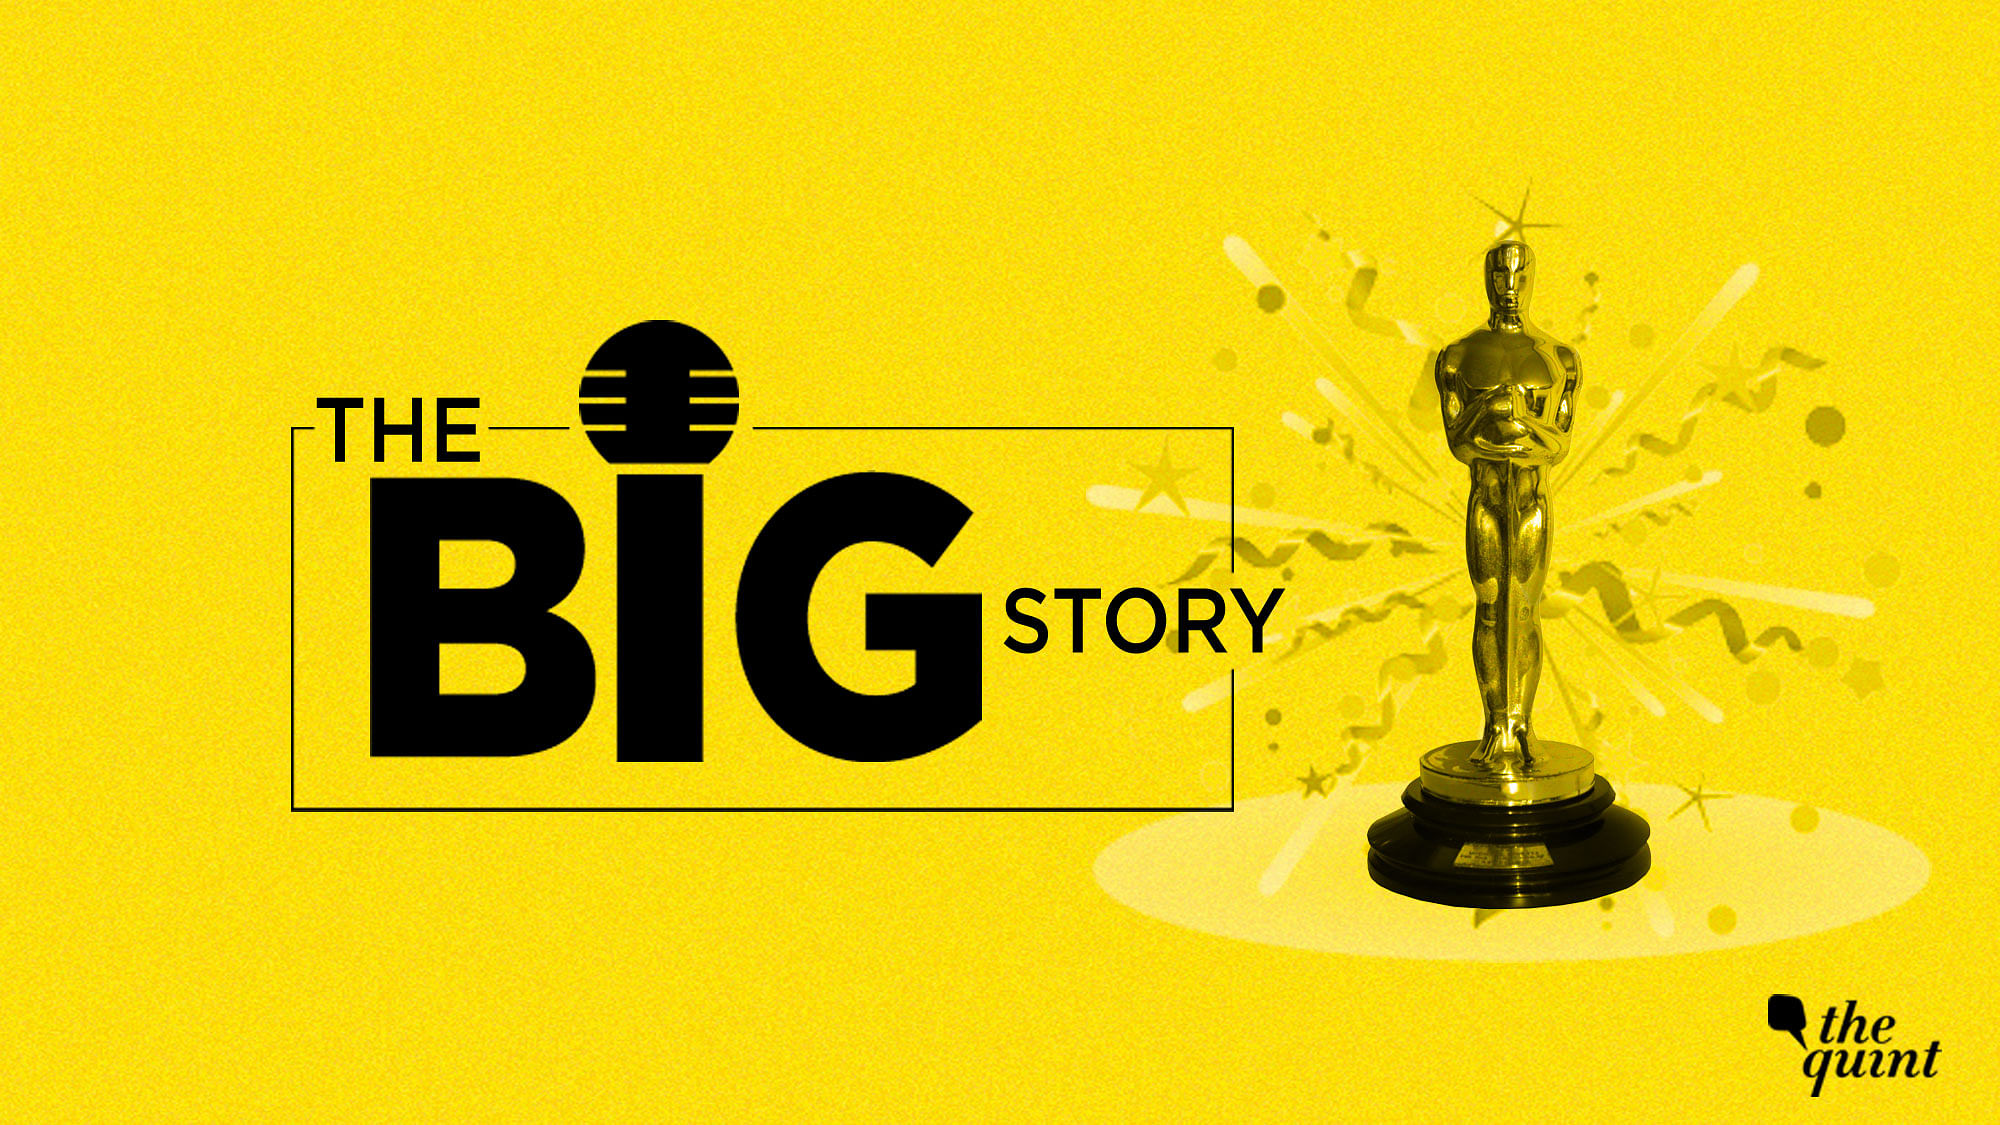 The 2019 Oscars have been a lot more controversial than usual, so on this episode we’ll look at the nominees, the awards and the controversy…oh my god so much controversy.